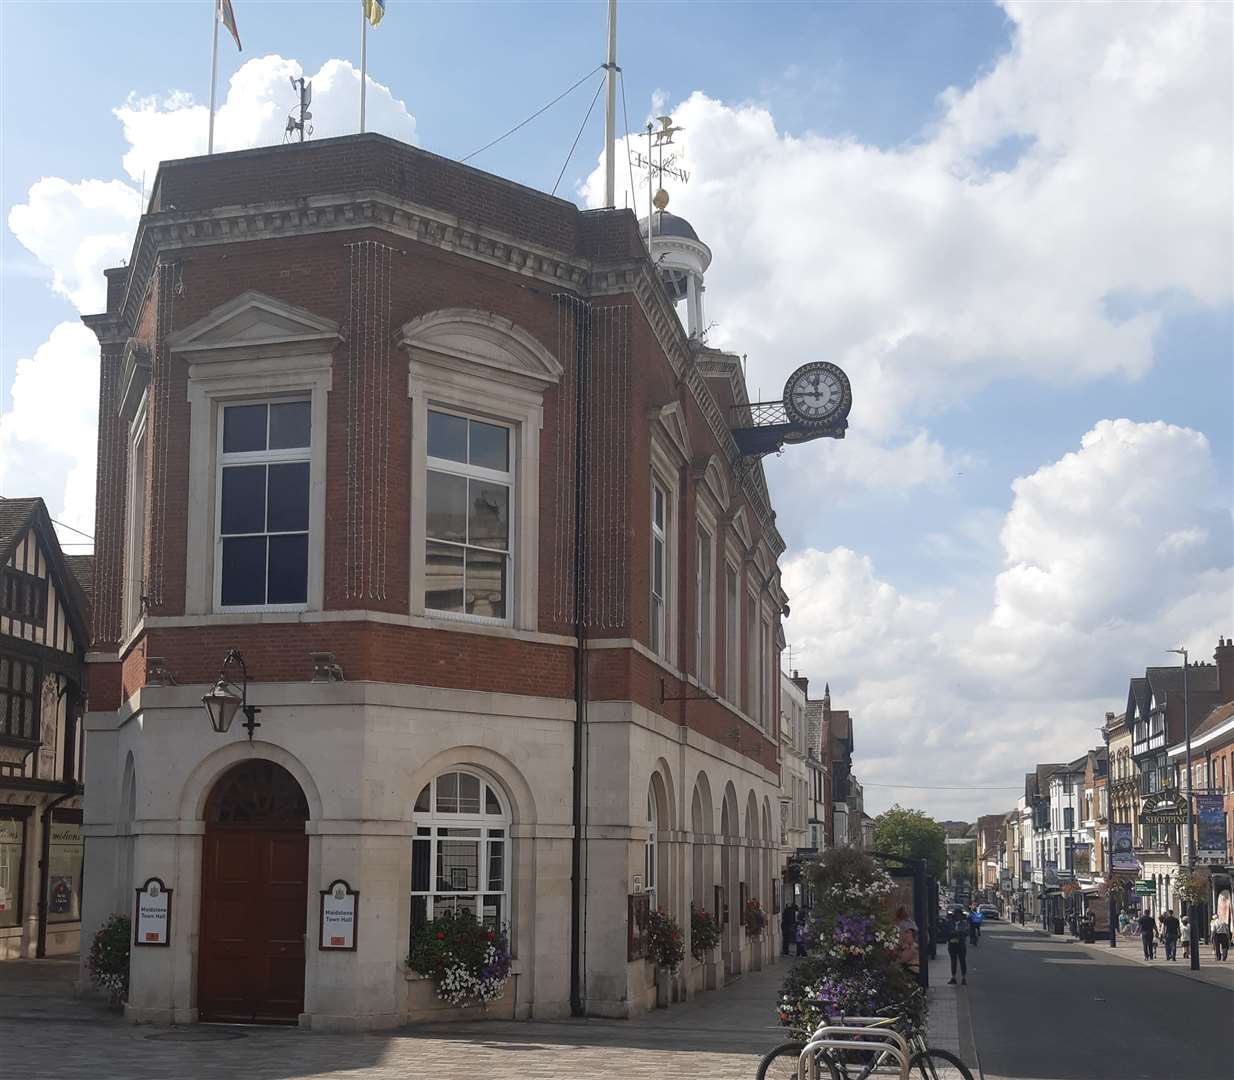 The hearing took place at Maidstone Town Hall